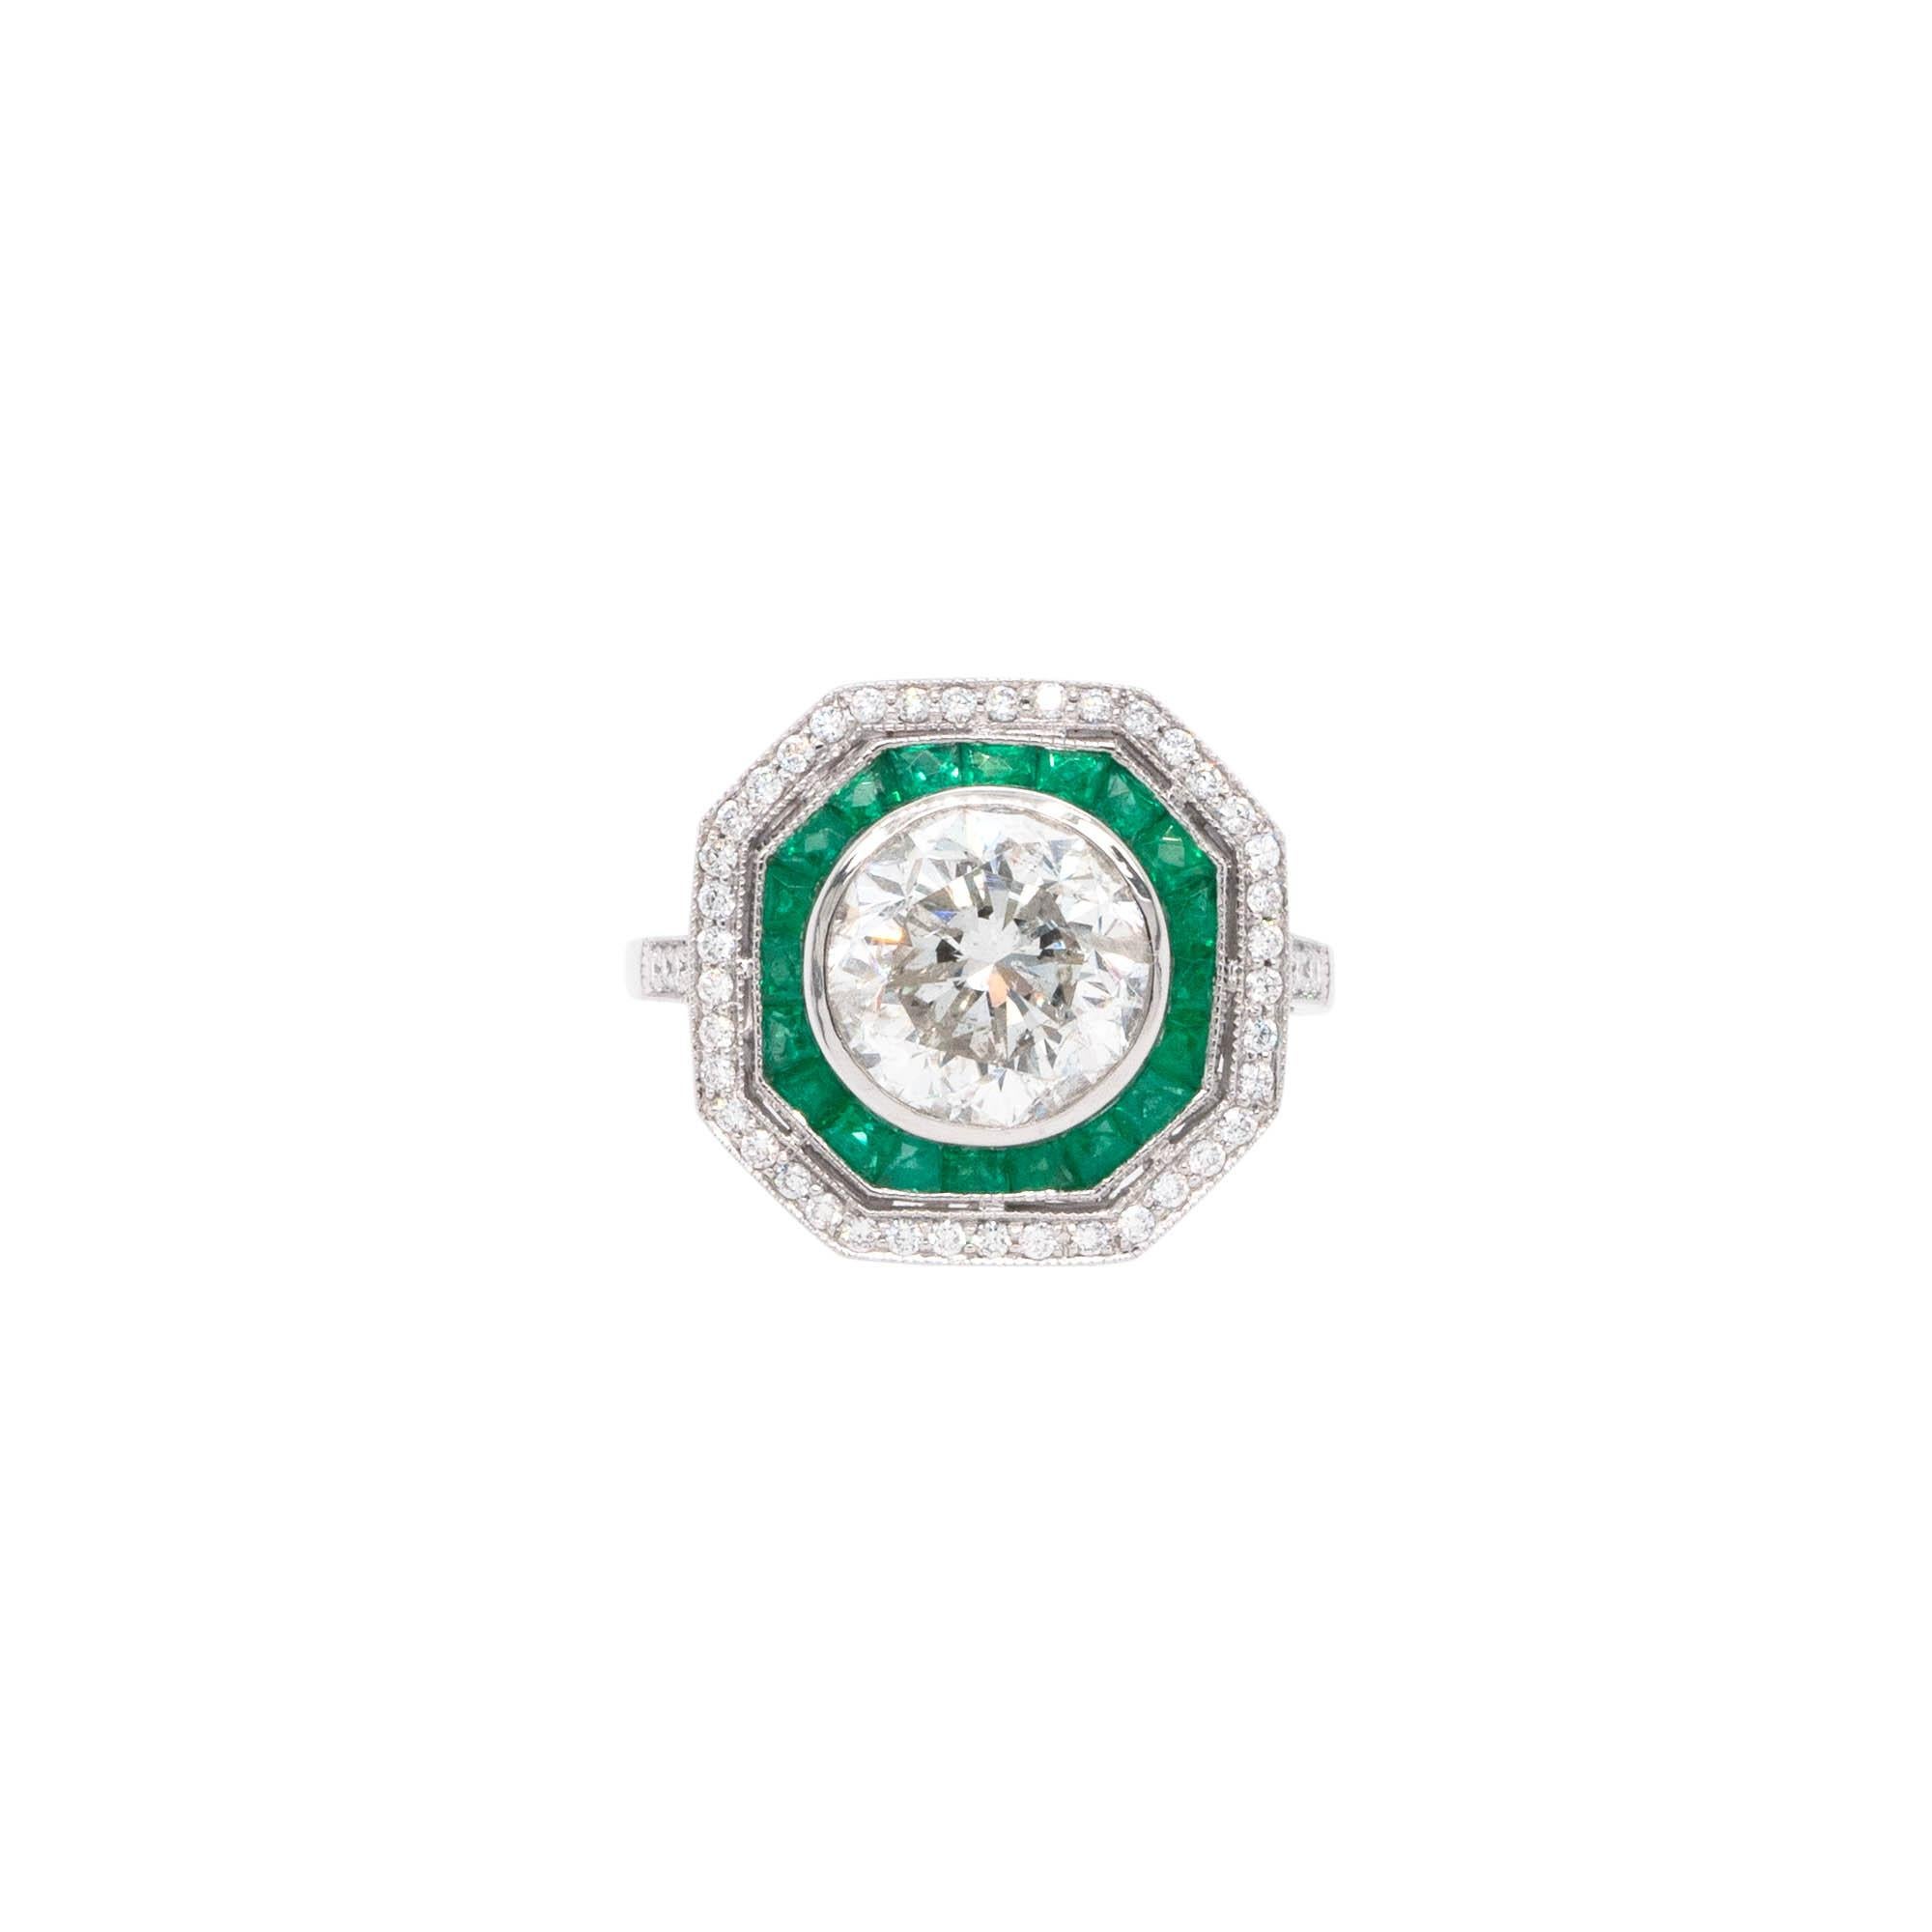 This is a platinum ring featuring a 3.66ct natural round brilliant cut diamond, with a G/H color and I1 clarity. It also has 0.31ctw of round cut natural diamonds that are G/H in color and VS in clarity, as well as 0.65ctw of emerald gemstones. The